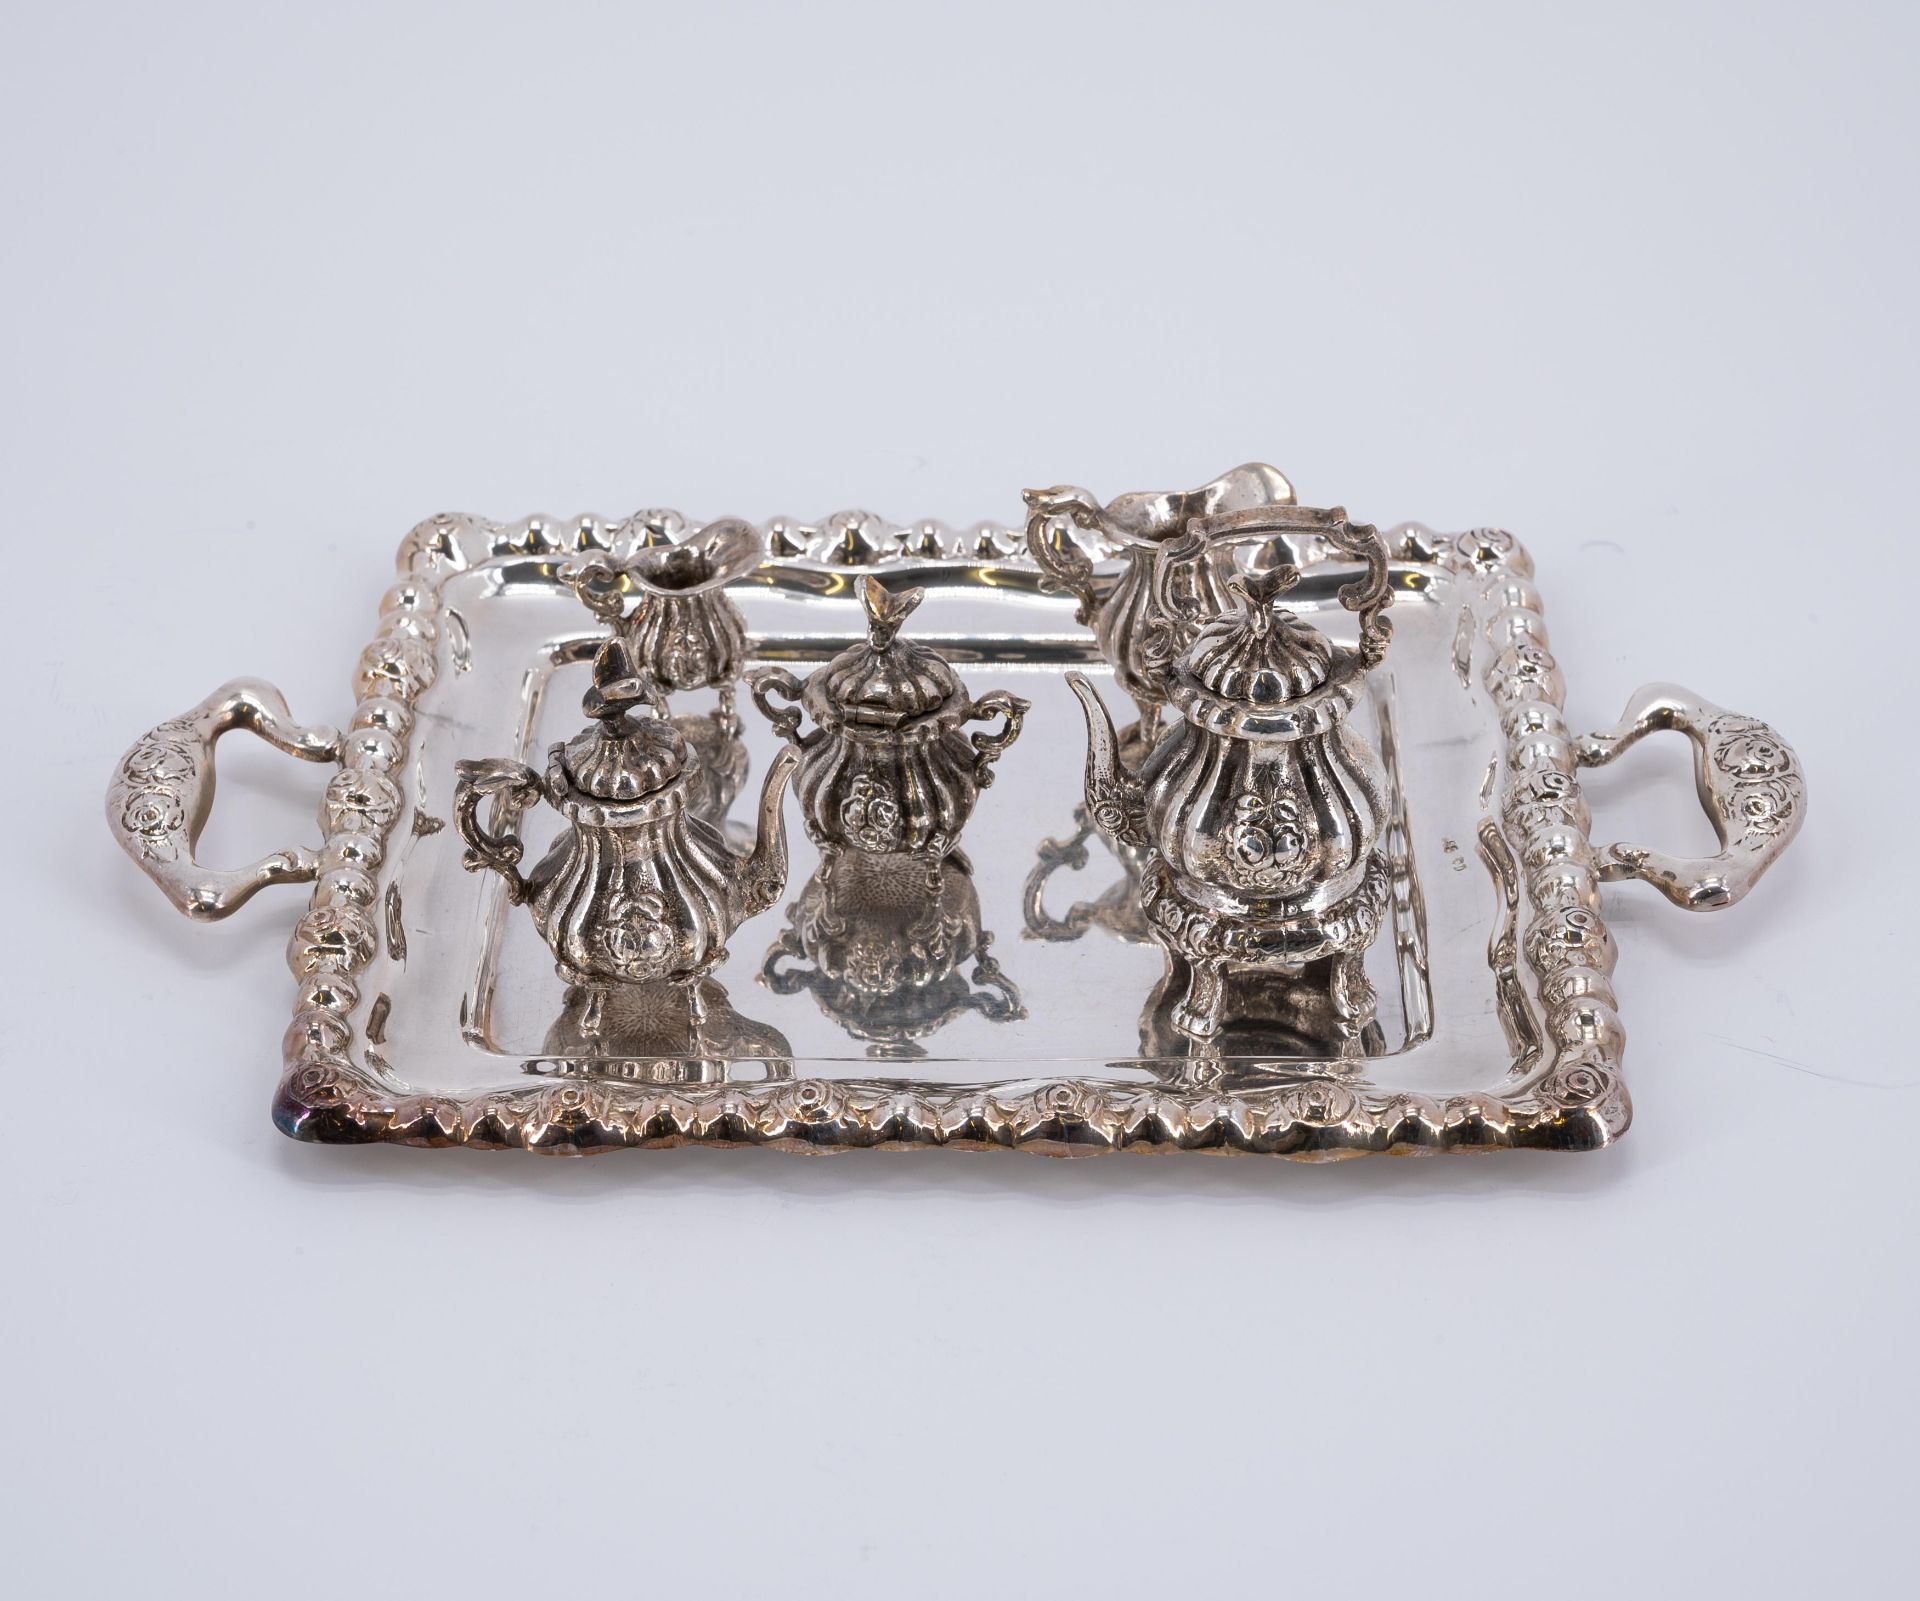 SILVER MINIATURE SERVICE, SIX MINIATURE PLATES AND TWICE SIX GOBLETS ON TRAY - Image 9 of 9